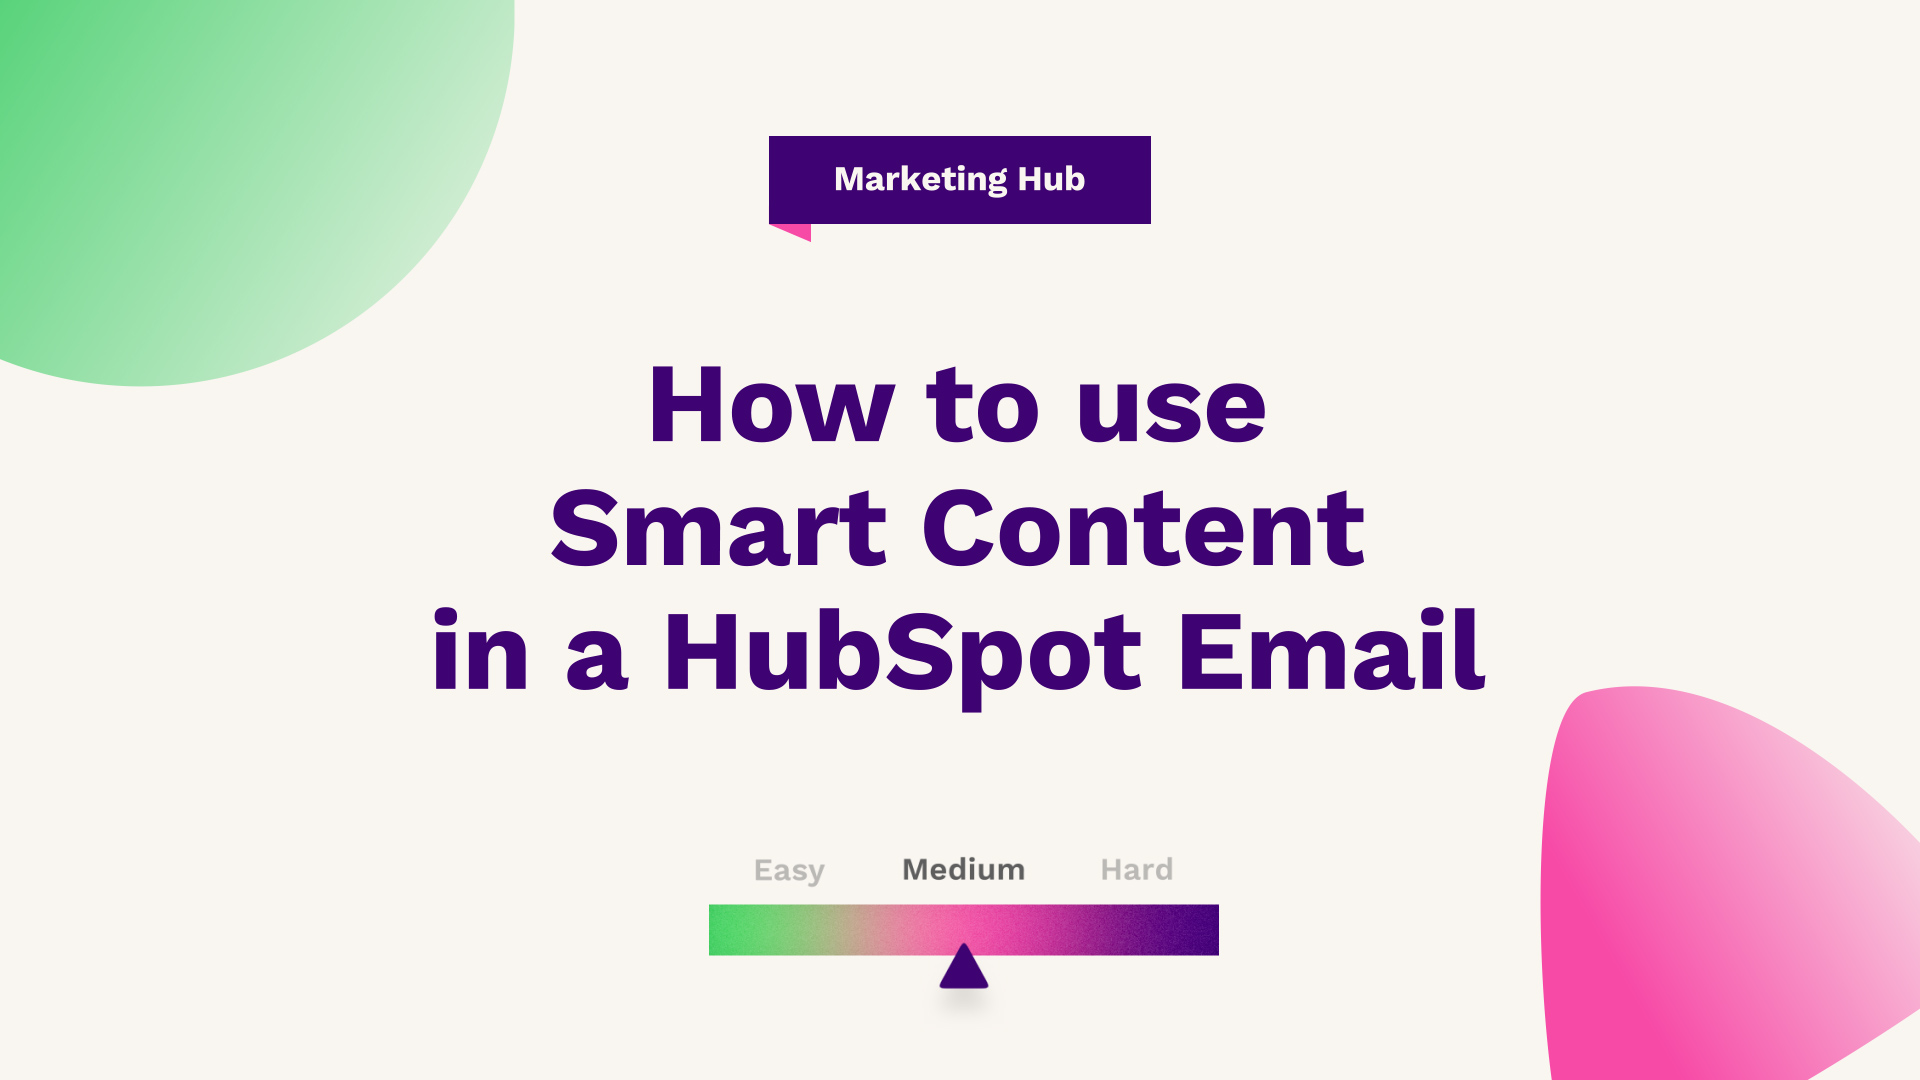 How to use Smart Content in a HubSpot Email